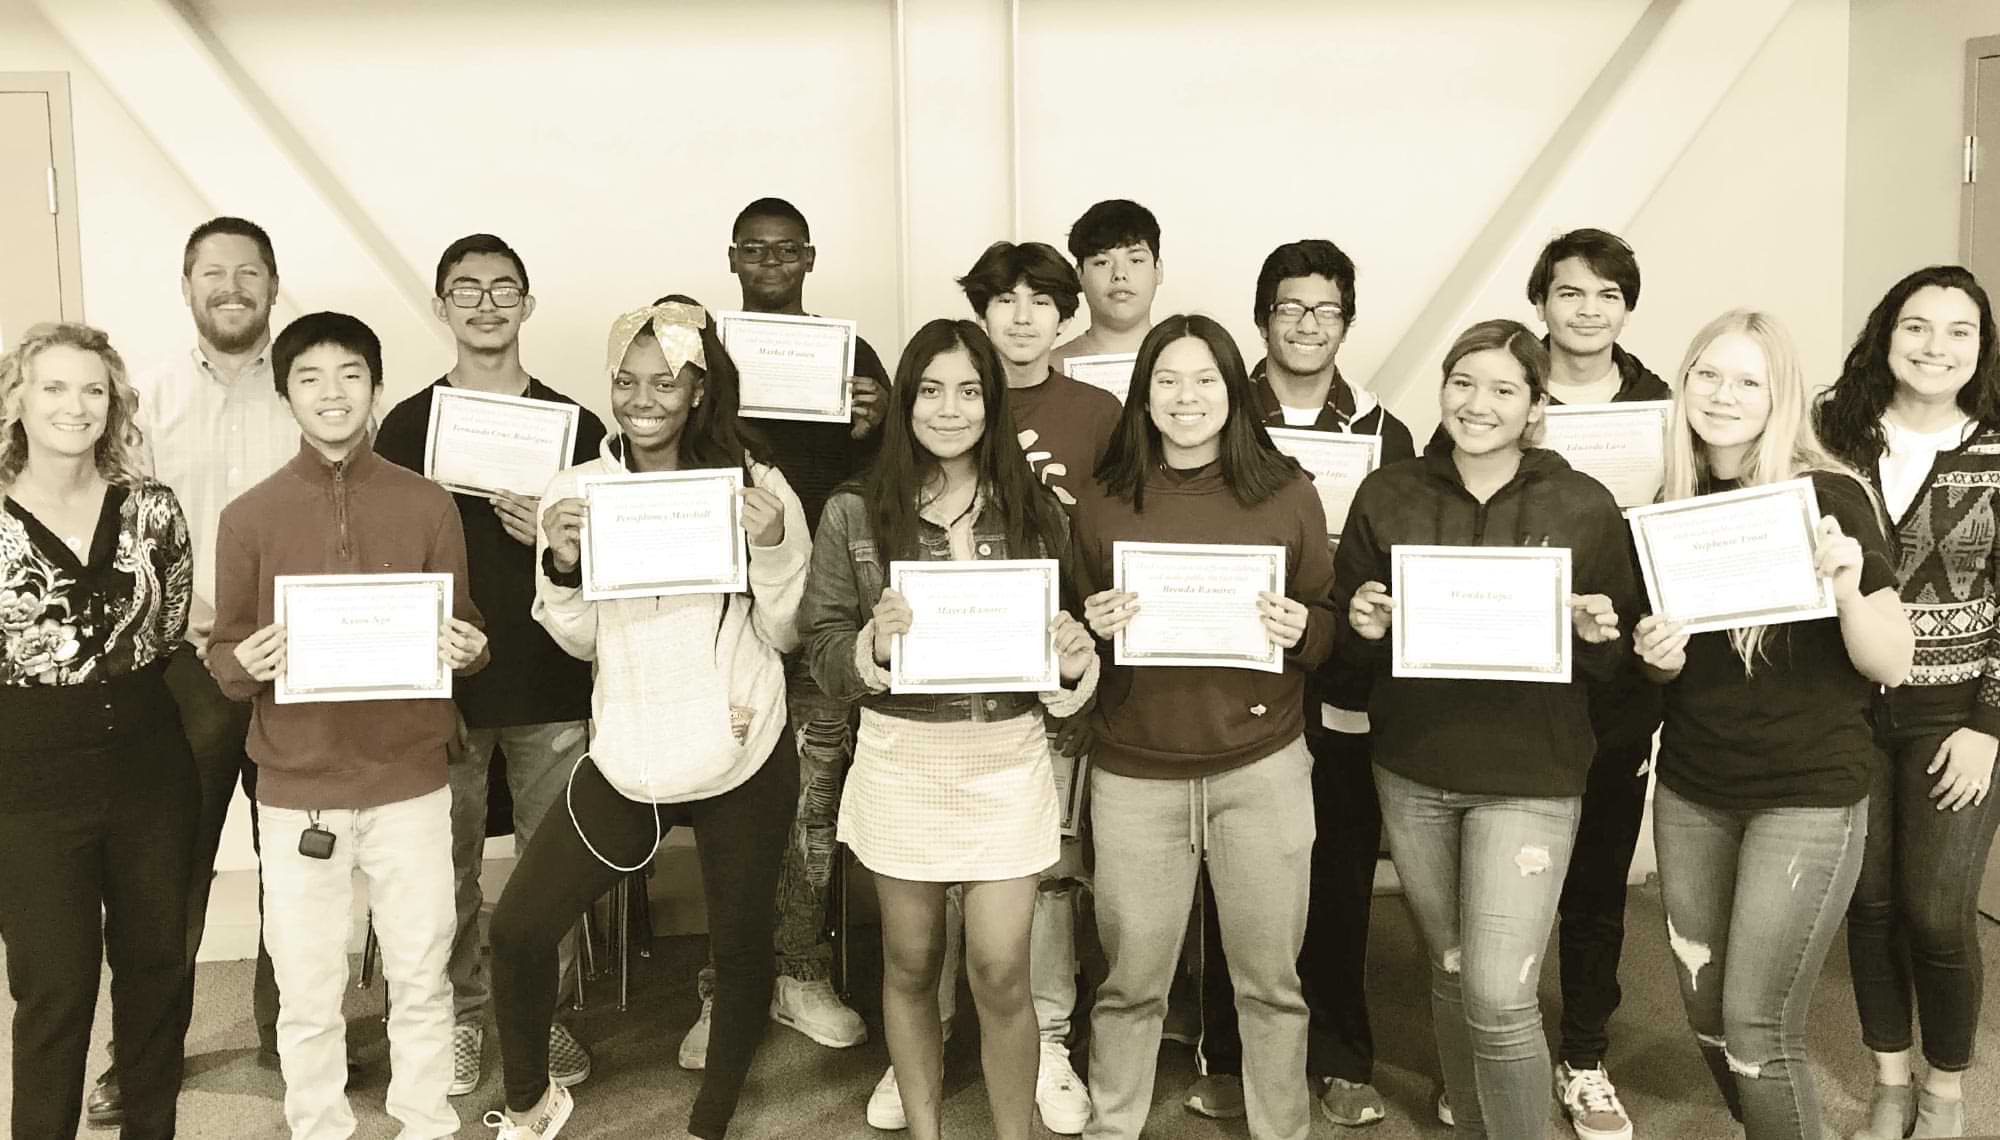 San Bernardino City Unified School District student members of the Undercover Anti-Bullying Team (UABT) take a group photo, each holding a certificate